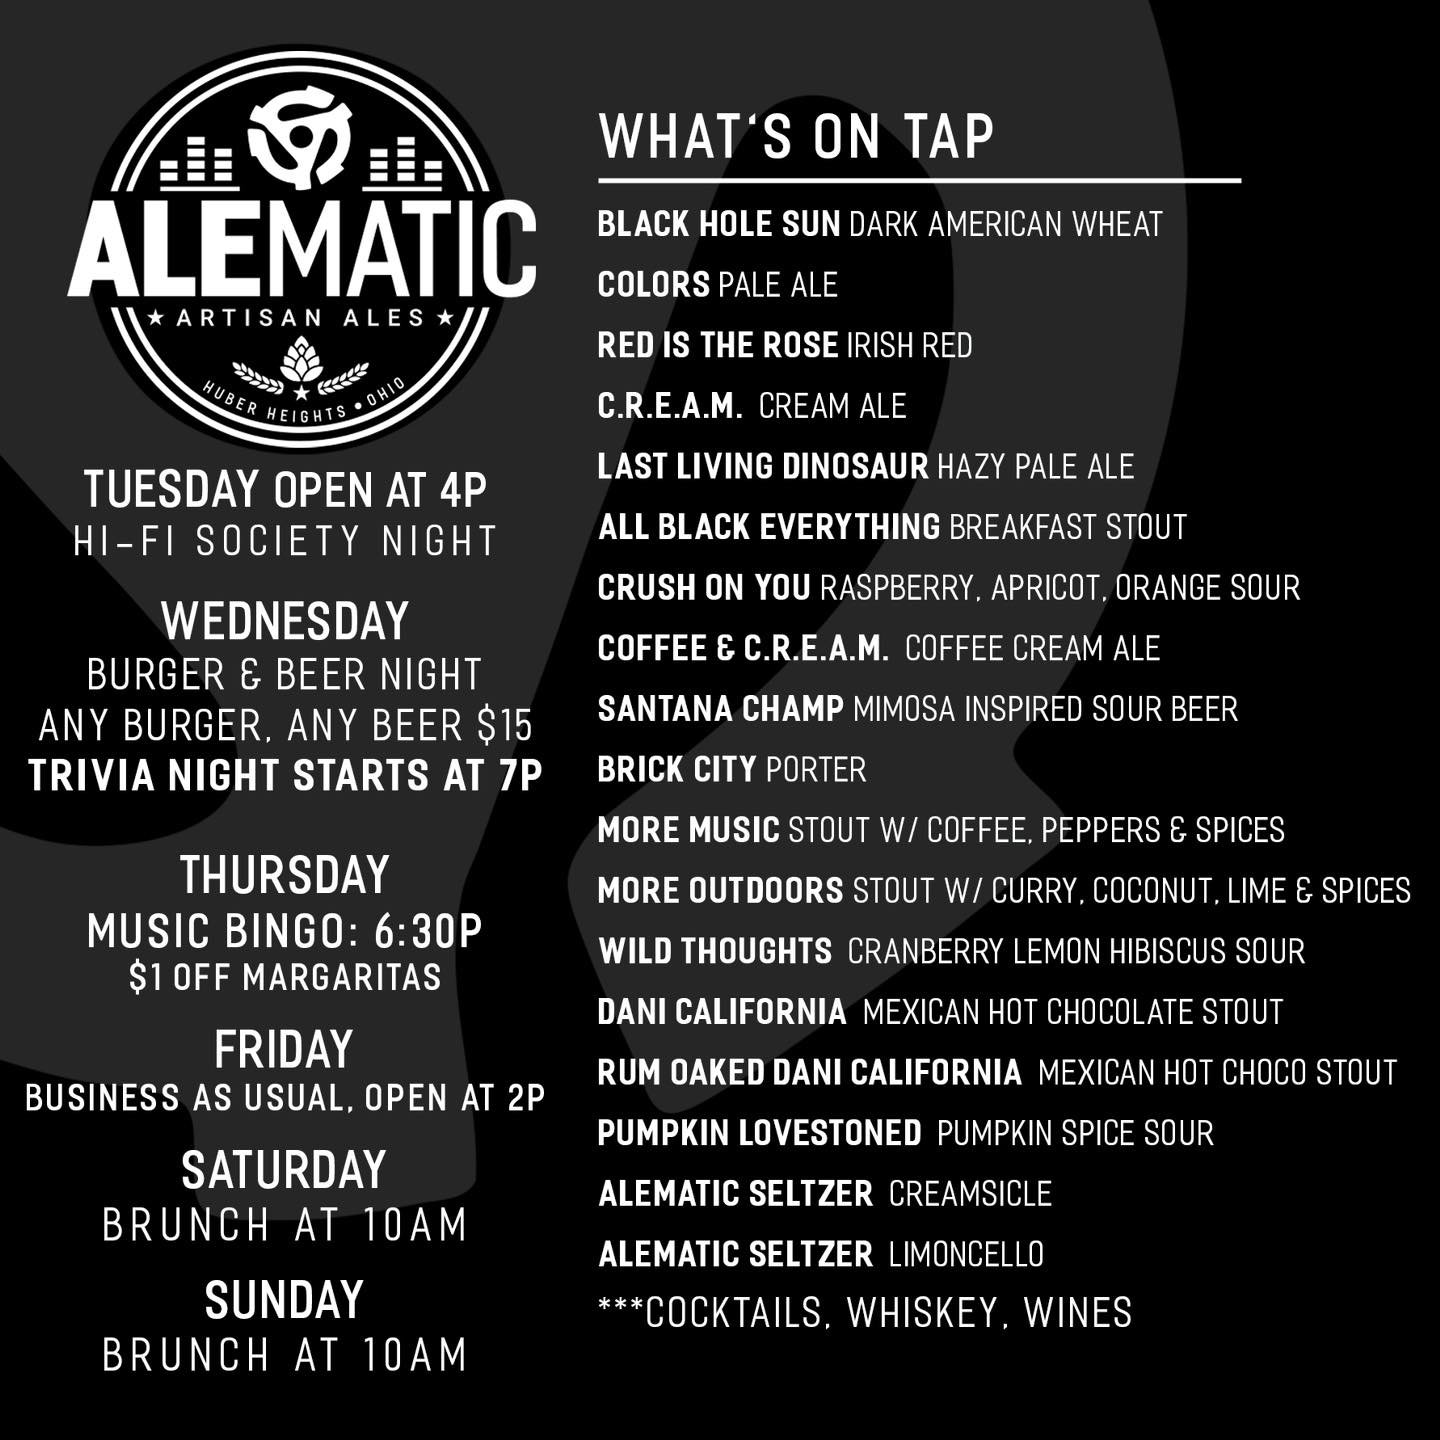 What&rsquo;s on Tap!  Trivia, Music Bingo and Patio weather! 

Tues: Open at 4p
Wed: Burger Night &amp; Trivia
Thurs: Music Bingo
Fri: Open at 2p
Sat &amp; Sun: Brunch at 10am